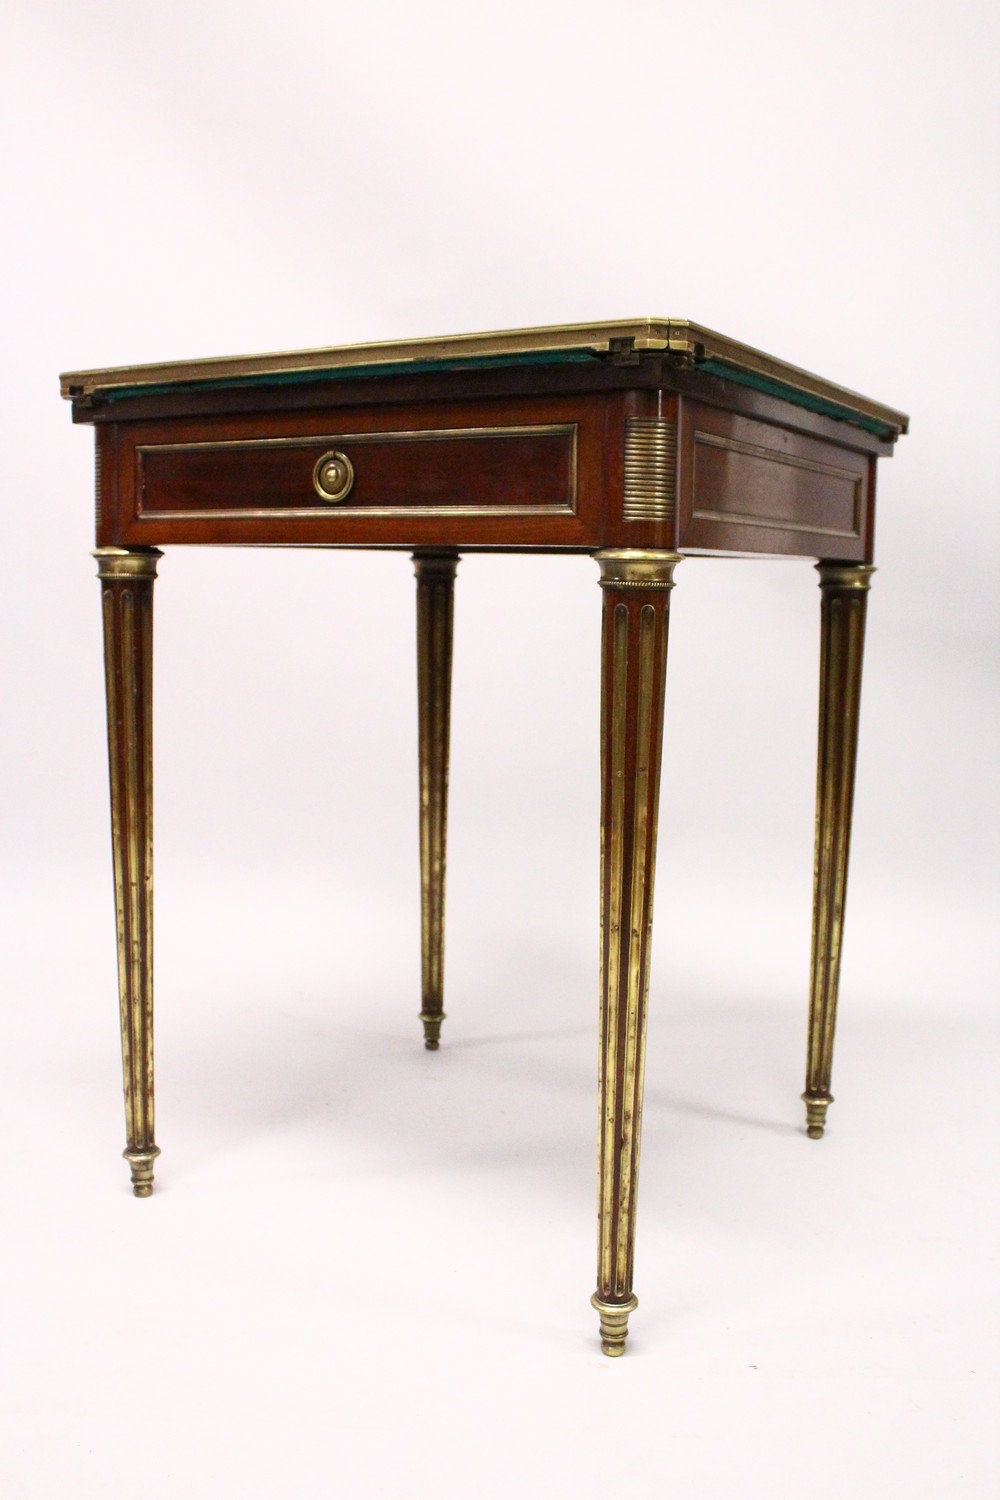 PAUL SORMANI, A GOOD 19TH CENTURY MAHOGANY AND BRASS BOUND ENVELOPE CARD TABLE, with baize lined - Image 6 of 17